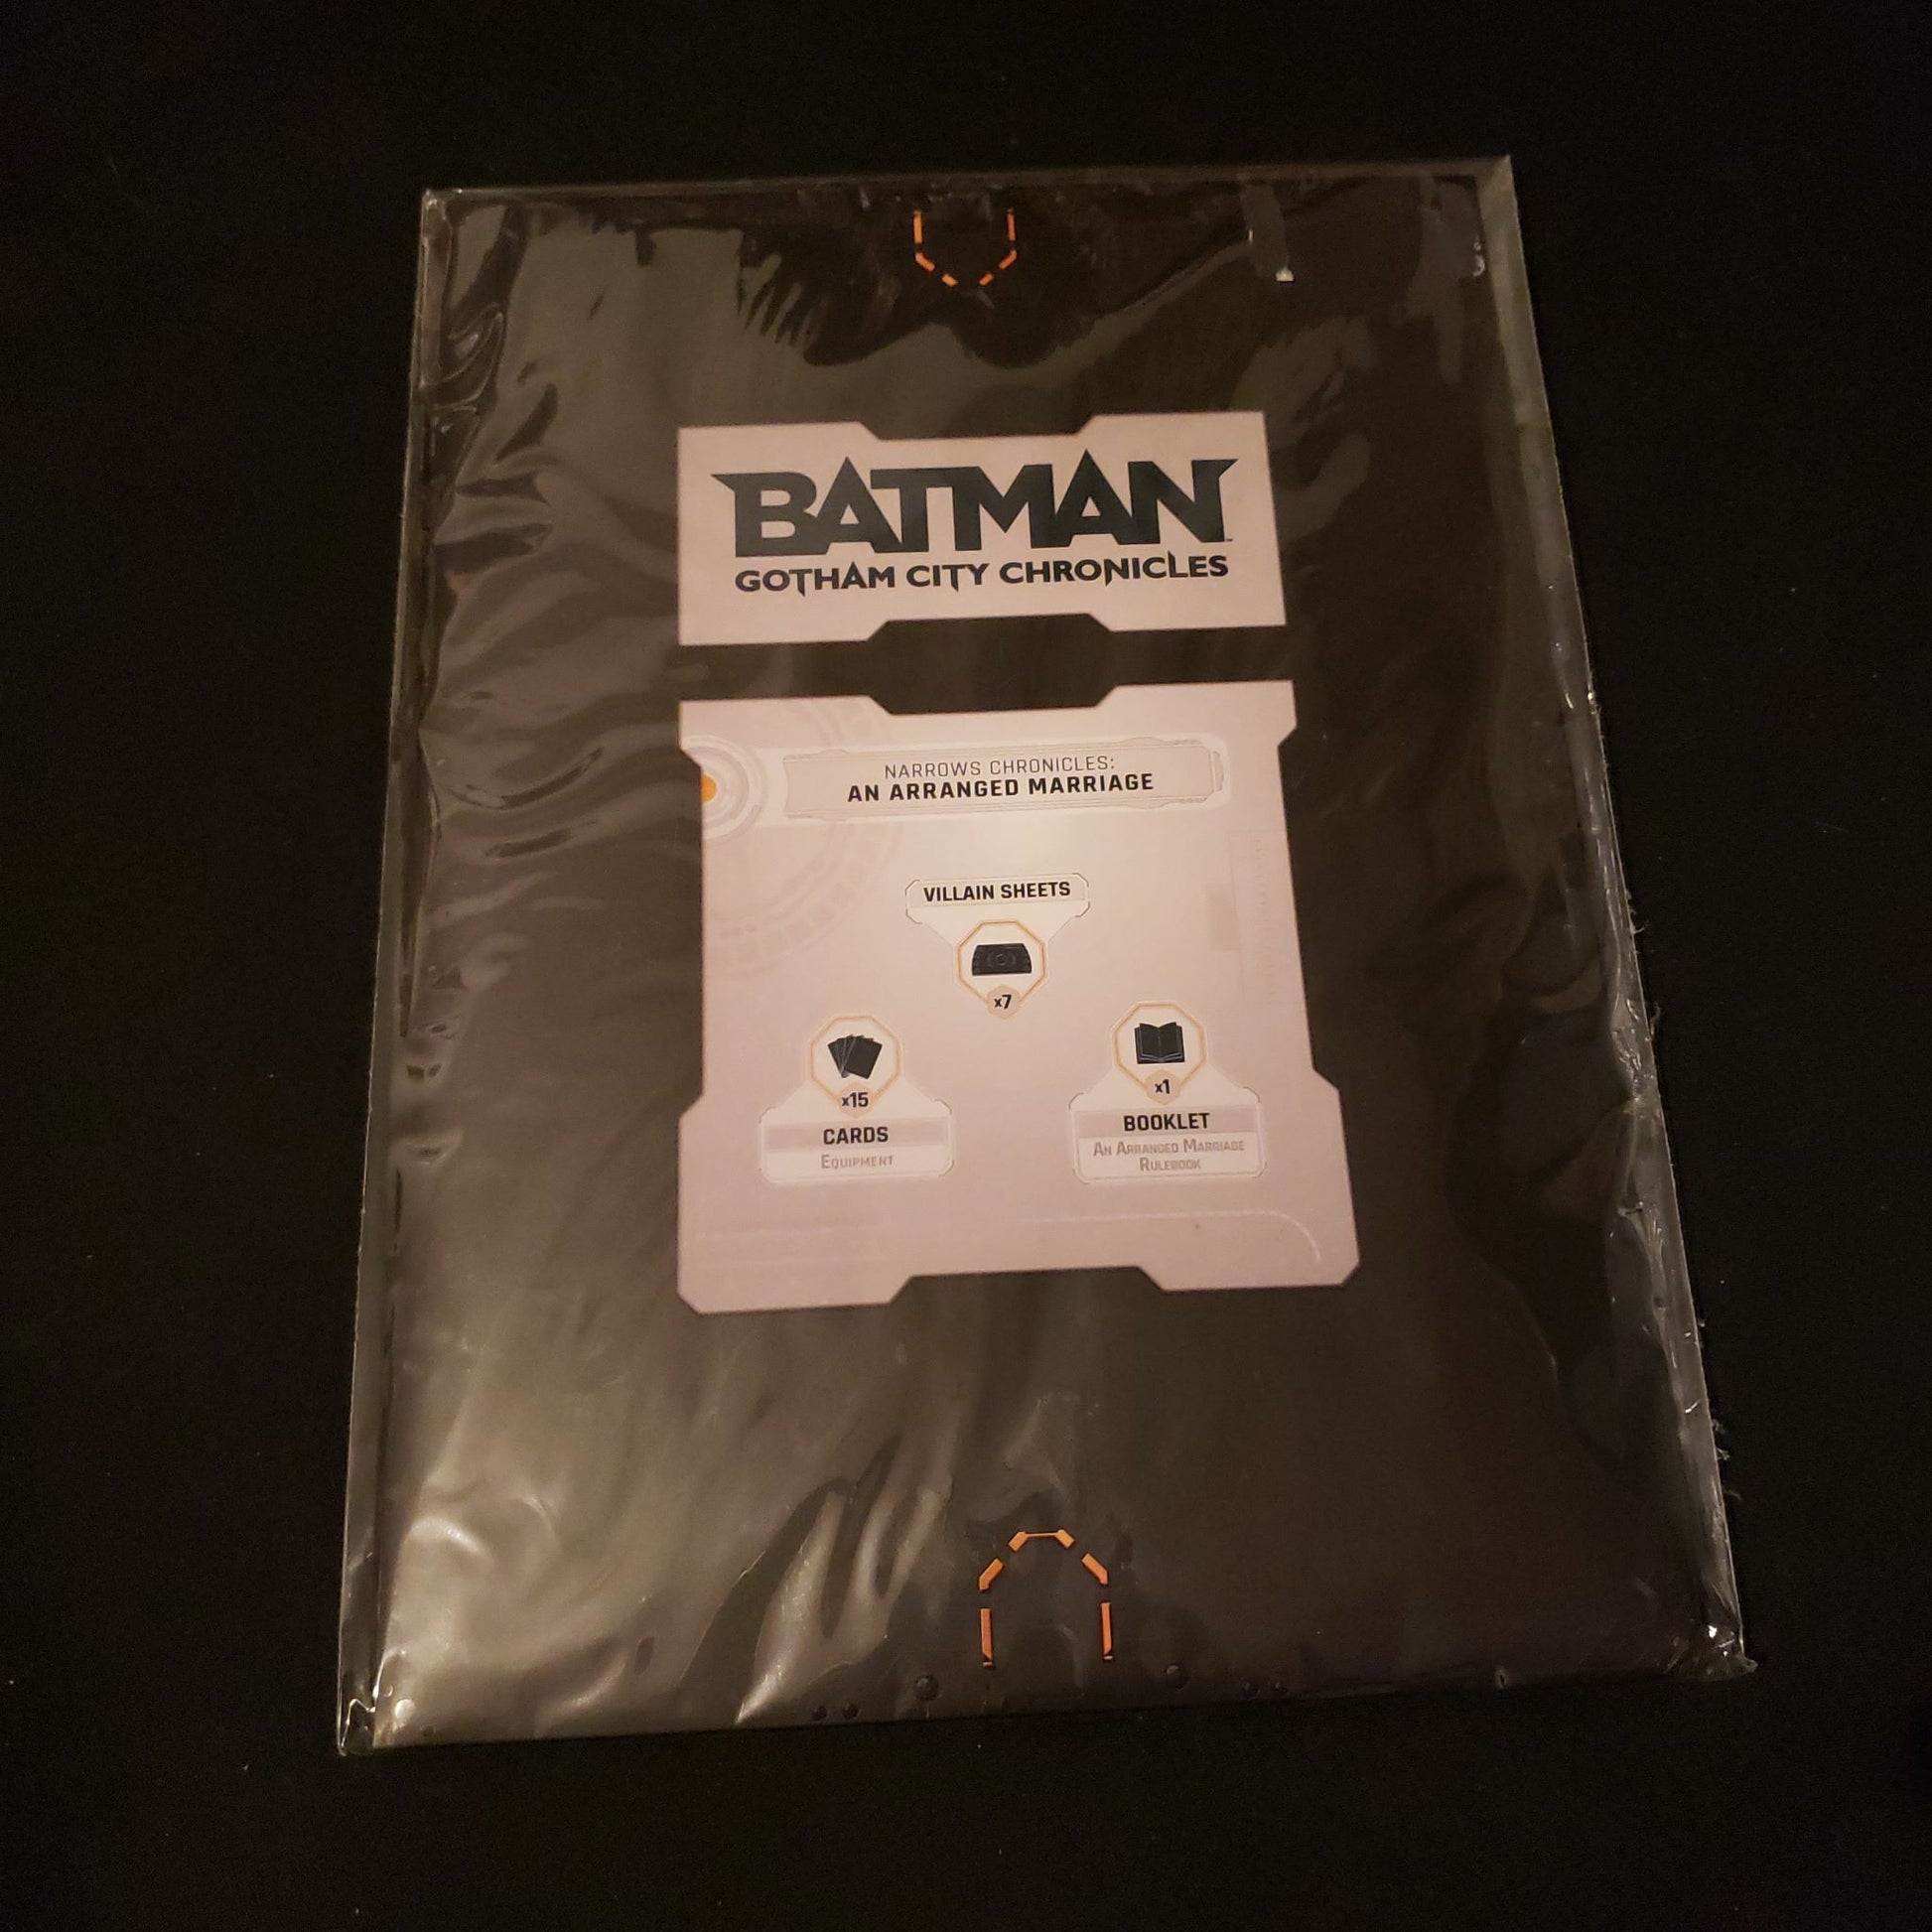 Image shows the front of the package for the Narrows Chronicles expansion for the Batman: Gotham City Chronicles board game